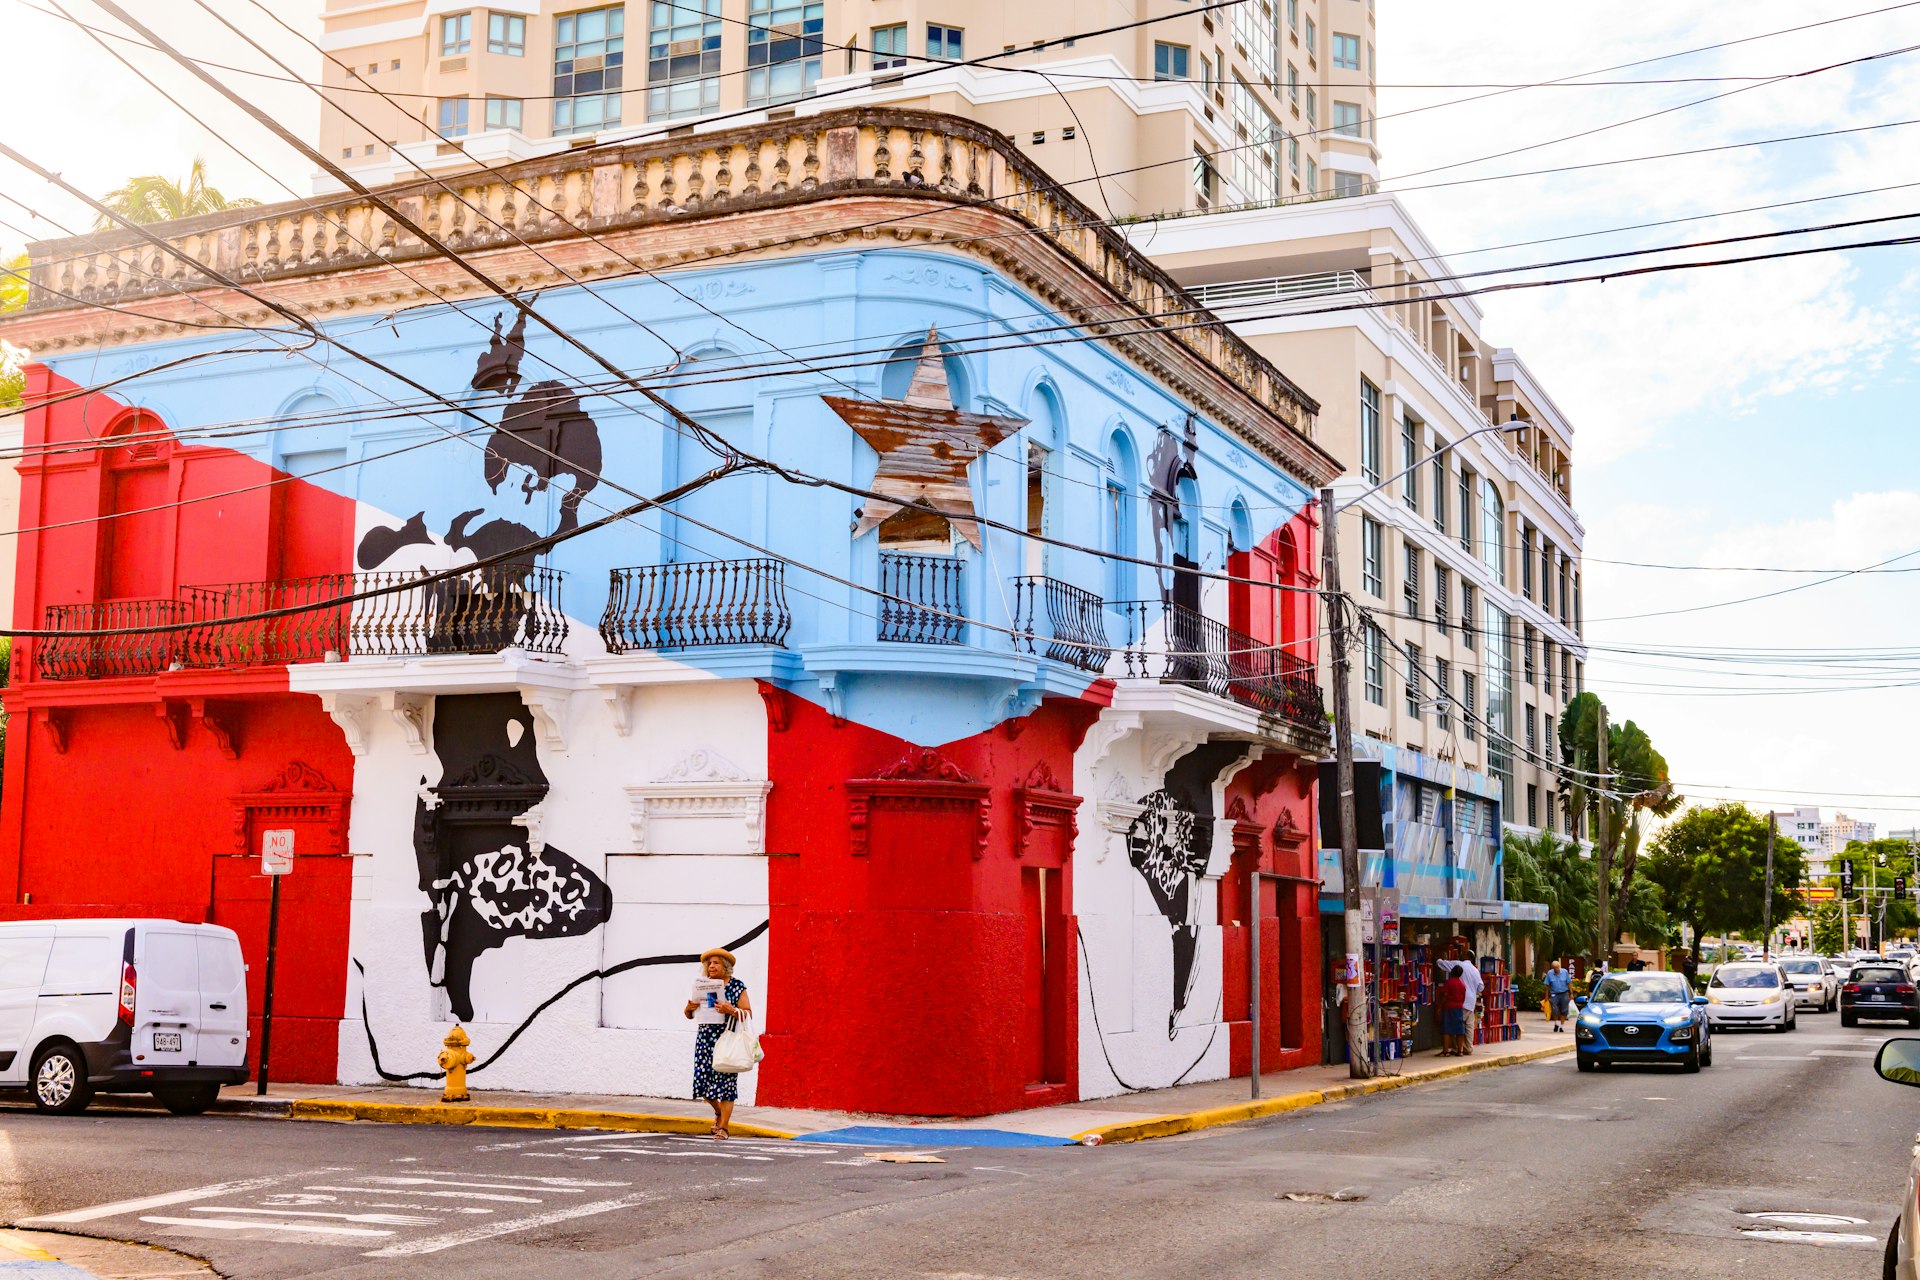 This photograph is of the street scene on Calle Loiza in the Santurce neighborhood of San Juan, Puerto Rico. A corner building is painted with the Puerto Rican flag. Cars and people can be seen along the street and sidewalk.